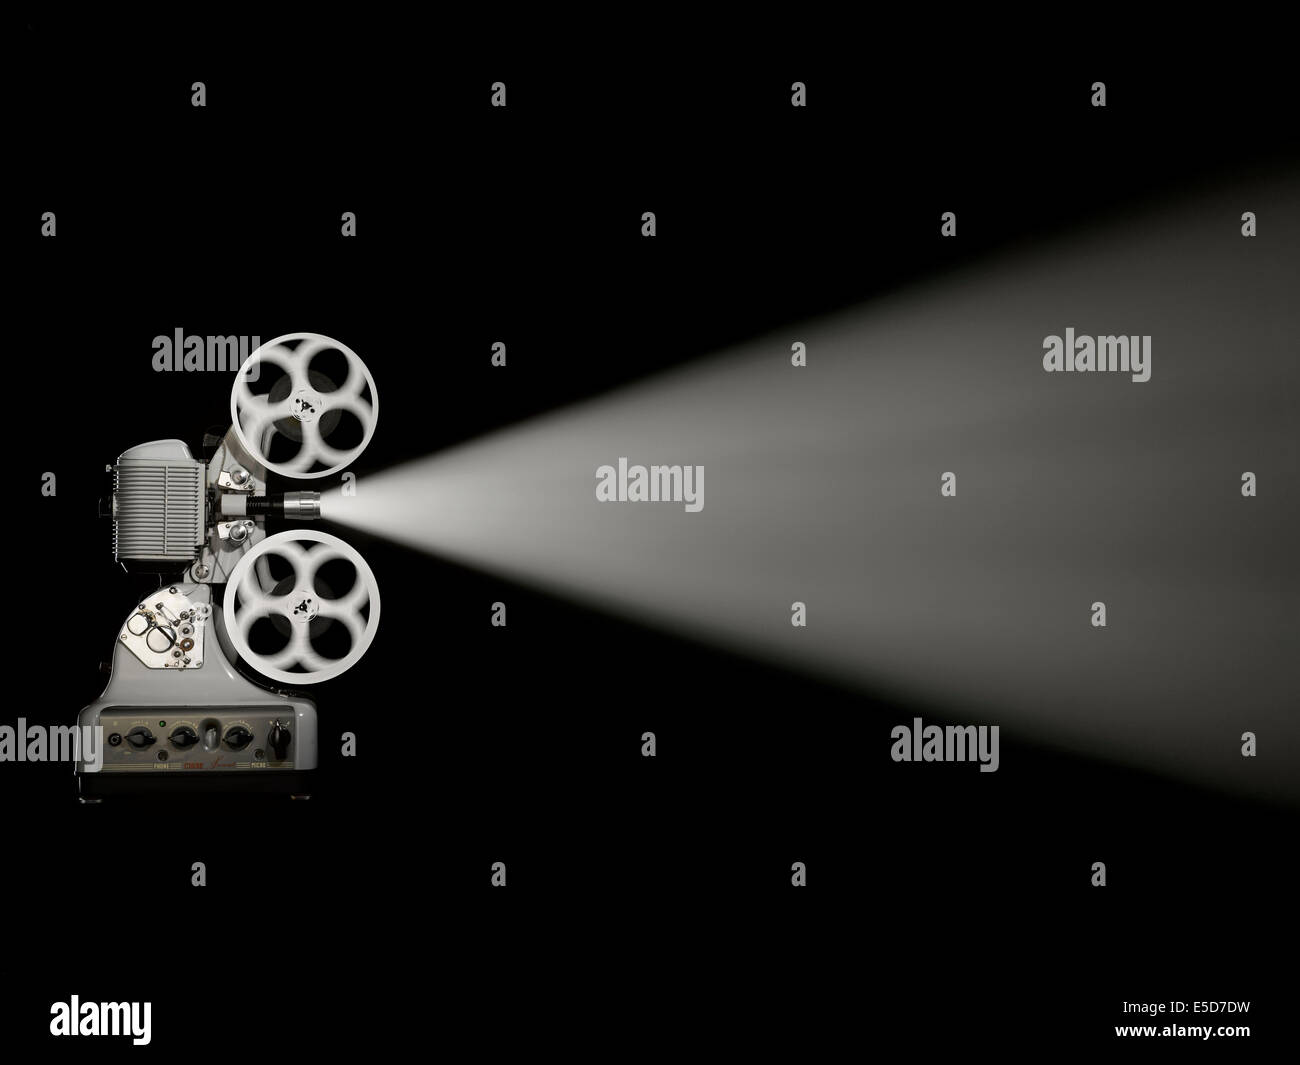 A side shot of an old style film projector on a black background Stock Photo